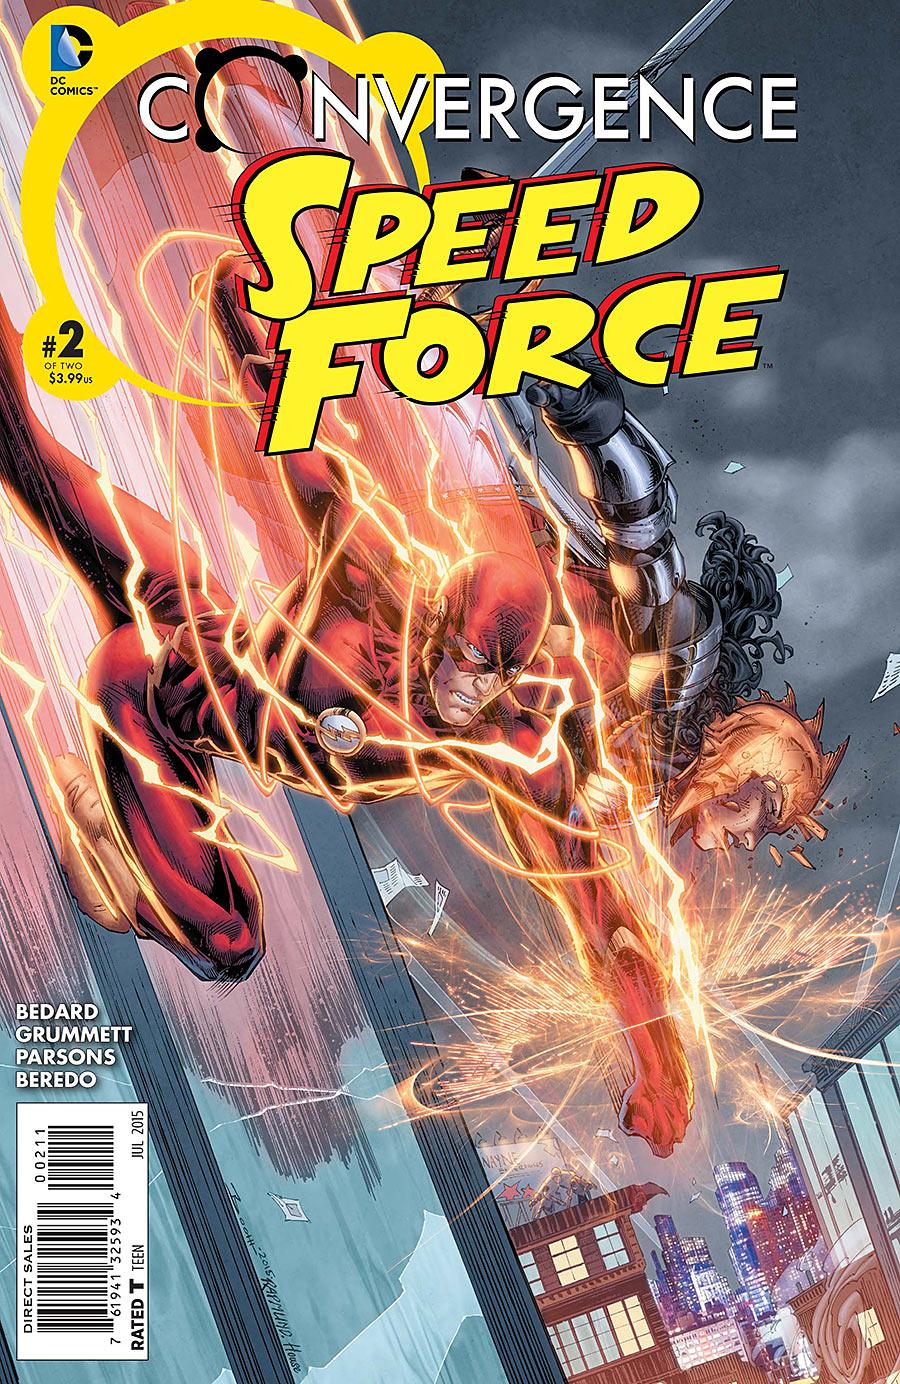 Convergence: Speed Force Vol. 1 #2